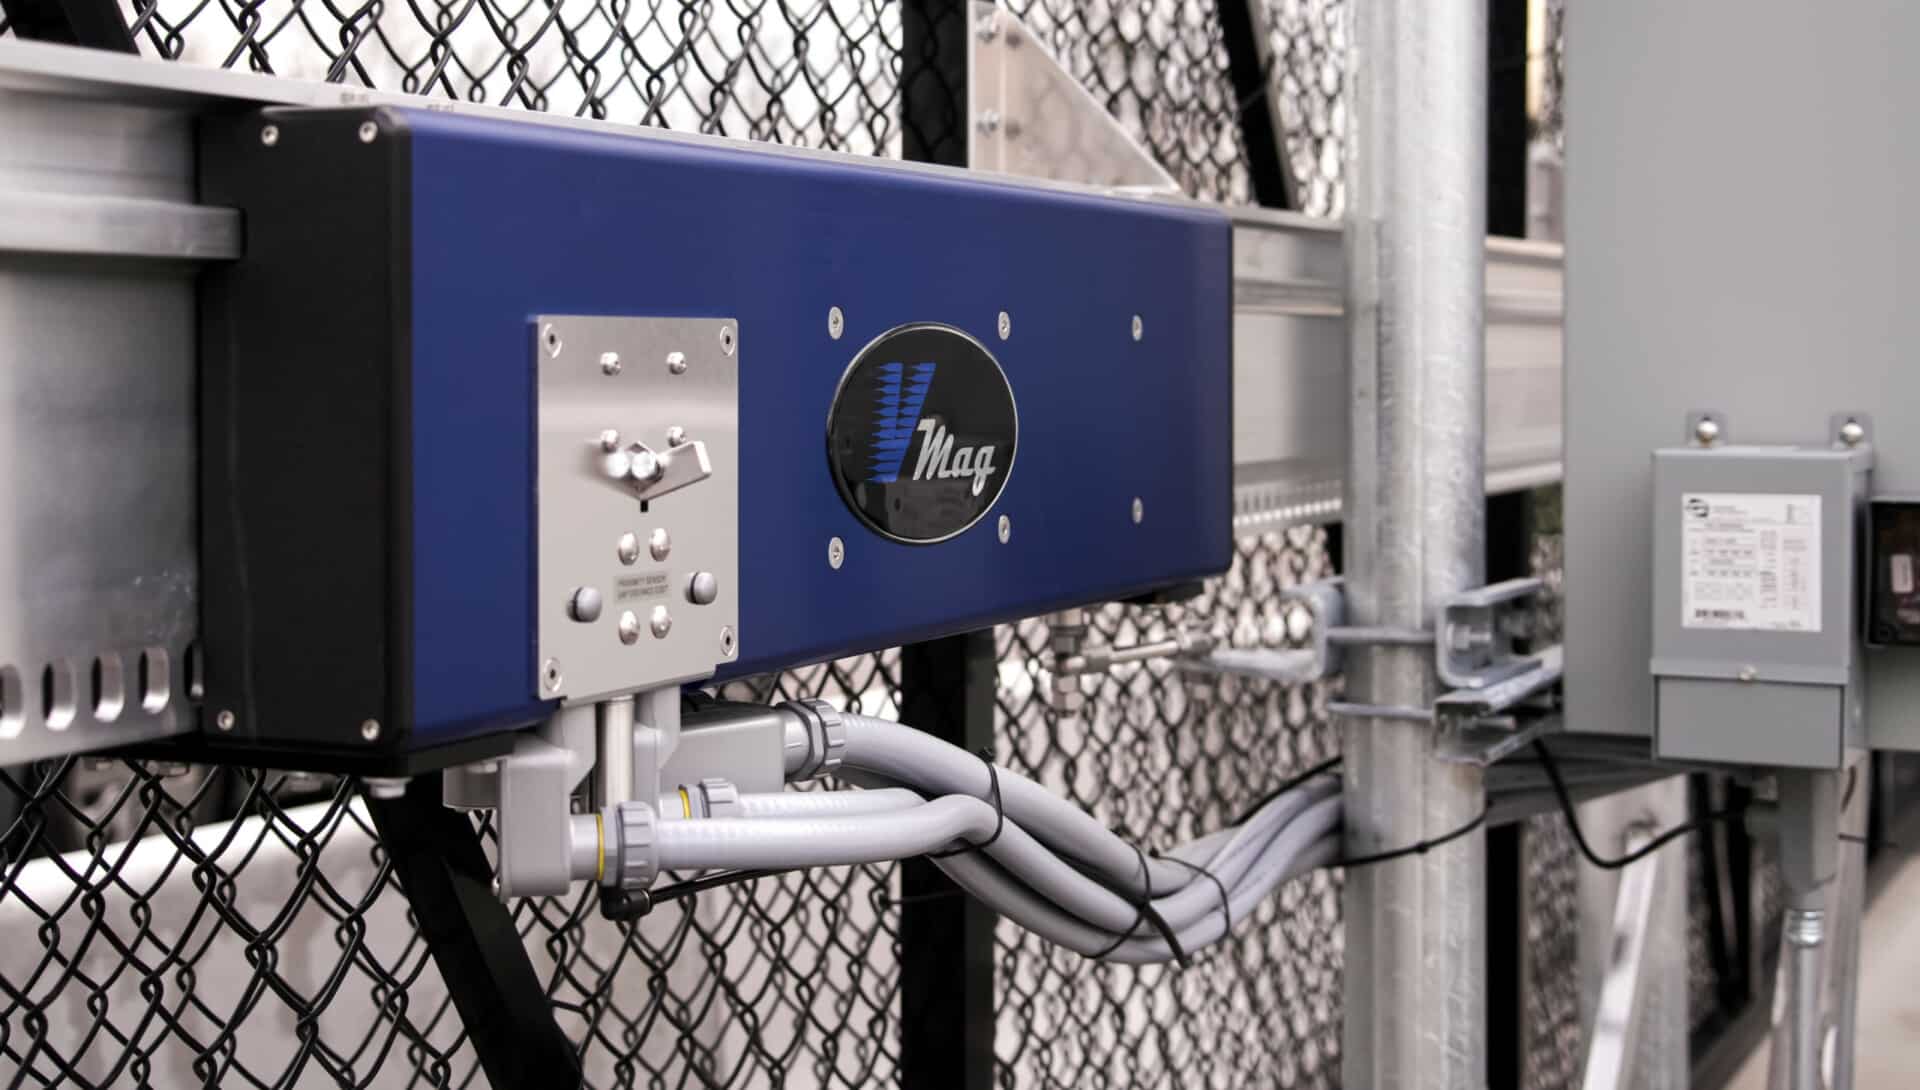 Vmag electronic gate system